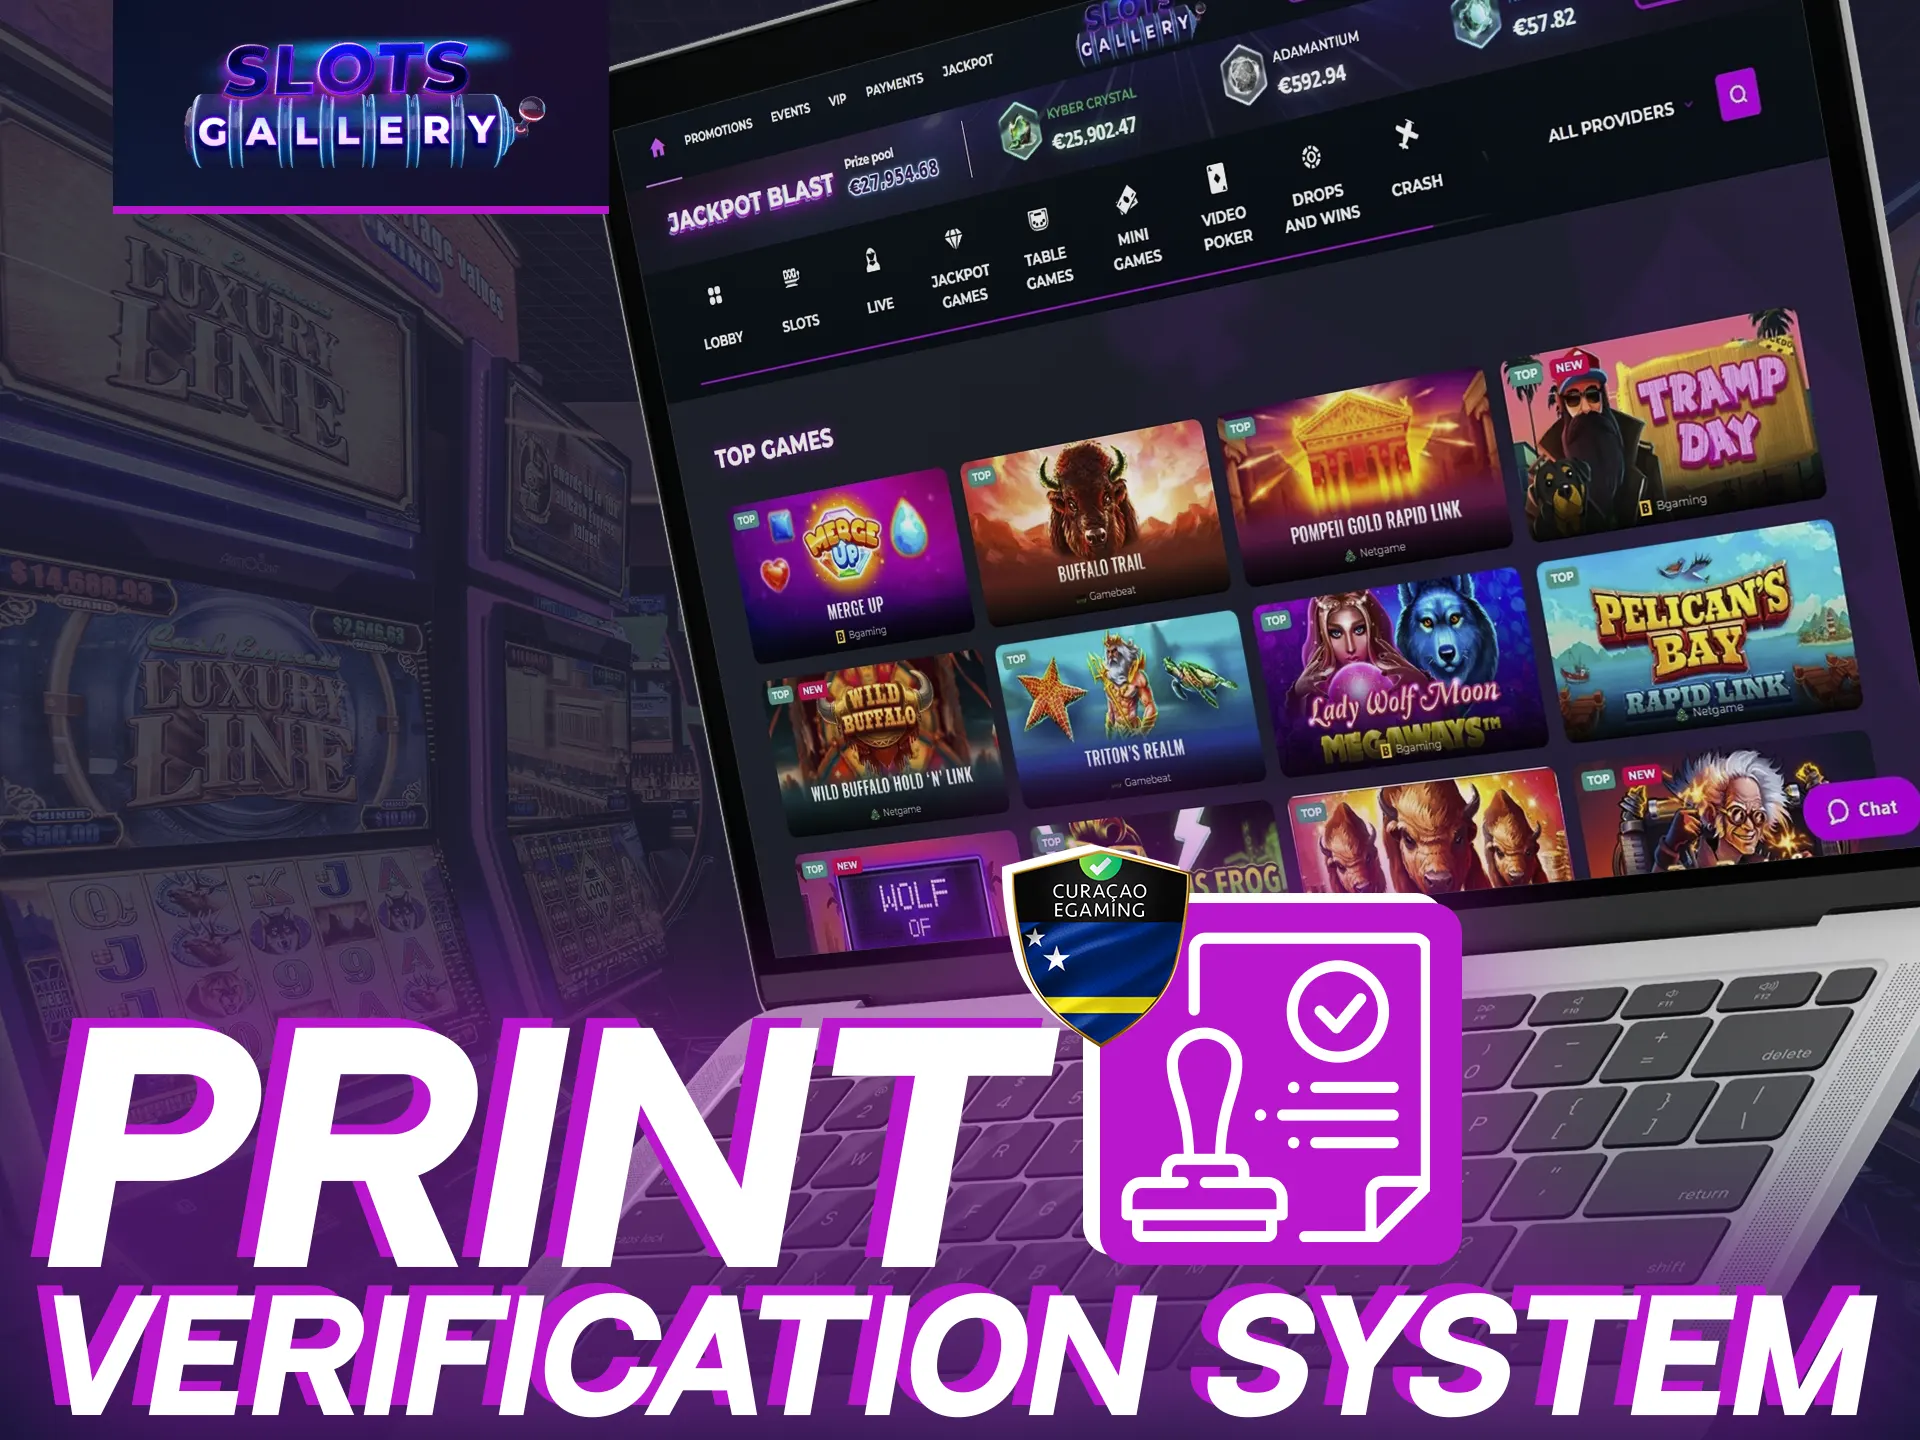 Slots Gallery employs a print verification system for company authentication.